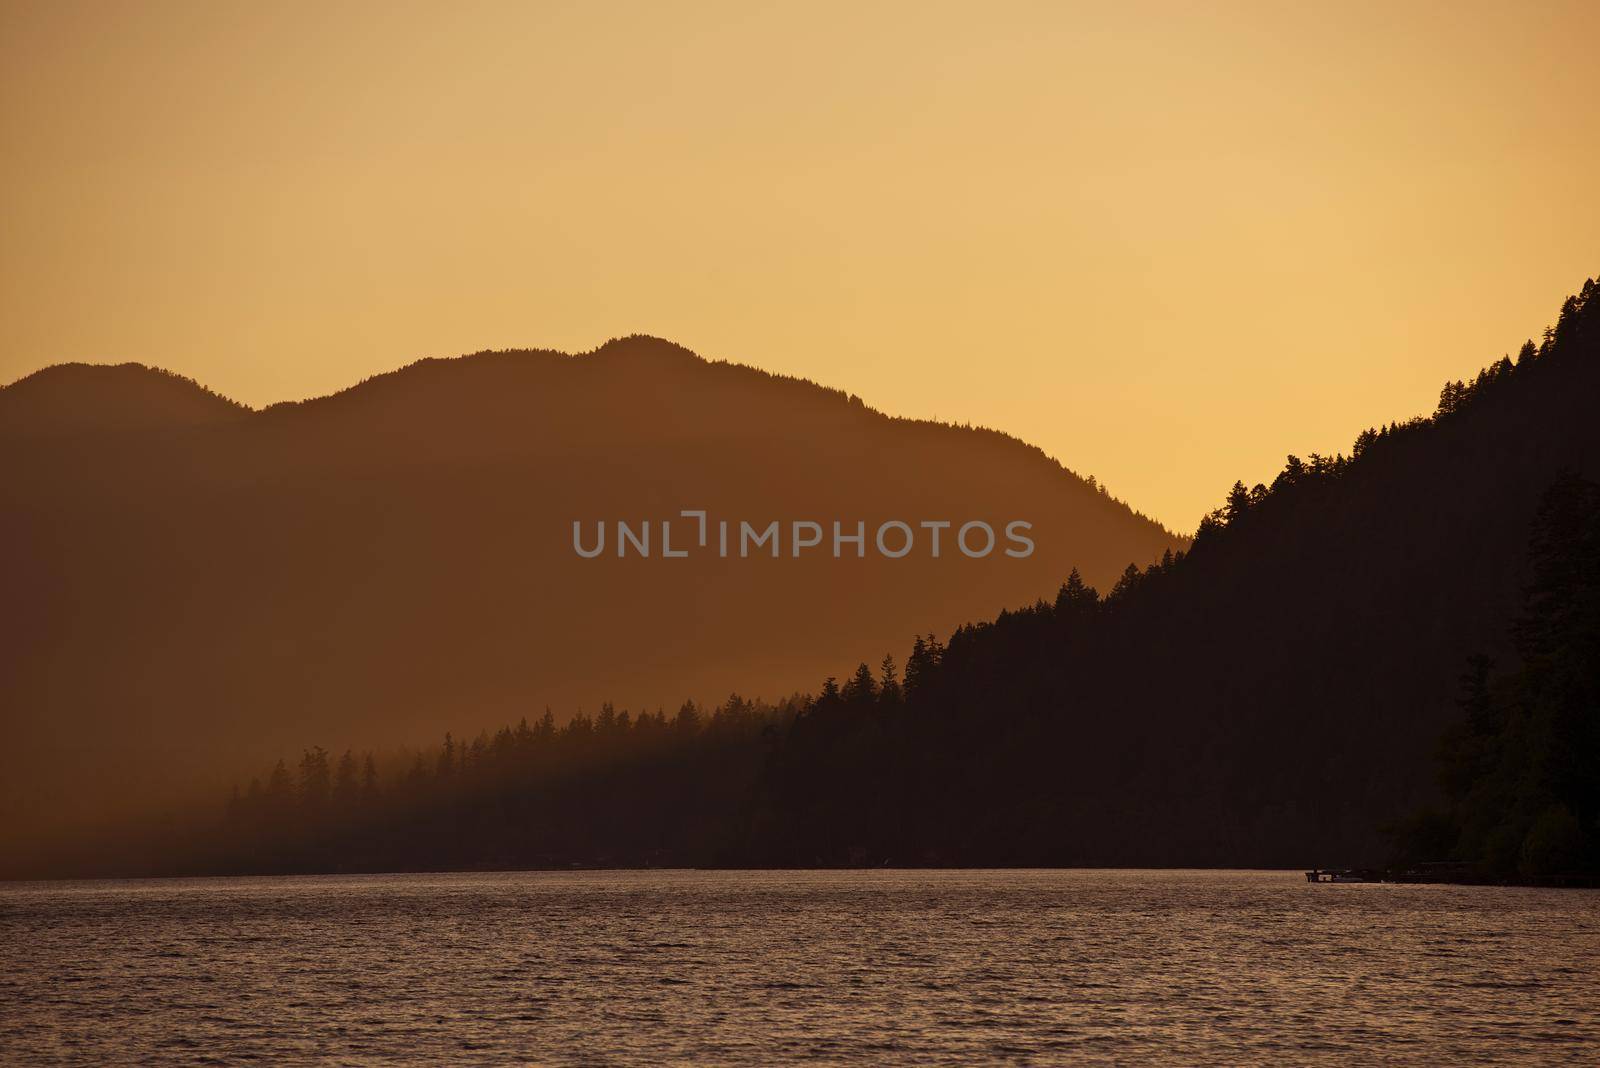 Sunset in the Hills - Lake Crescent Sunset Scenery. Nature Photography Collection.